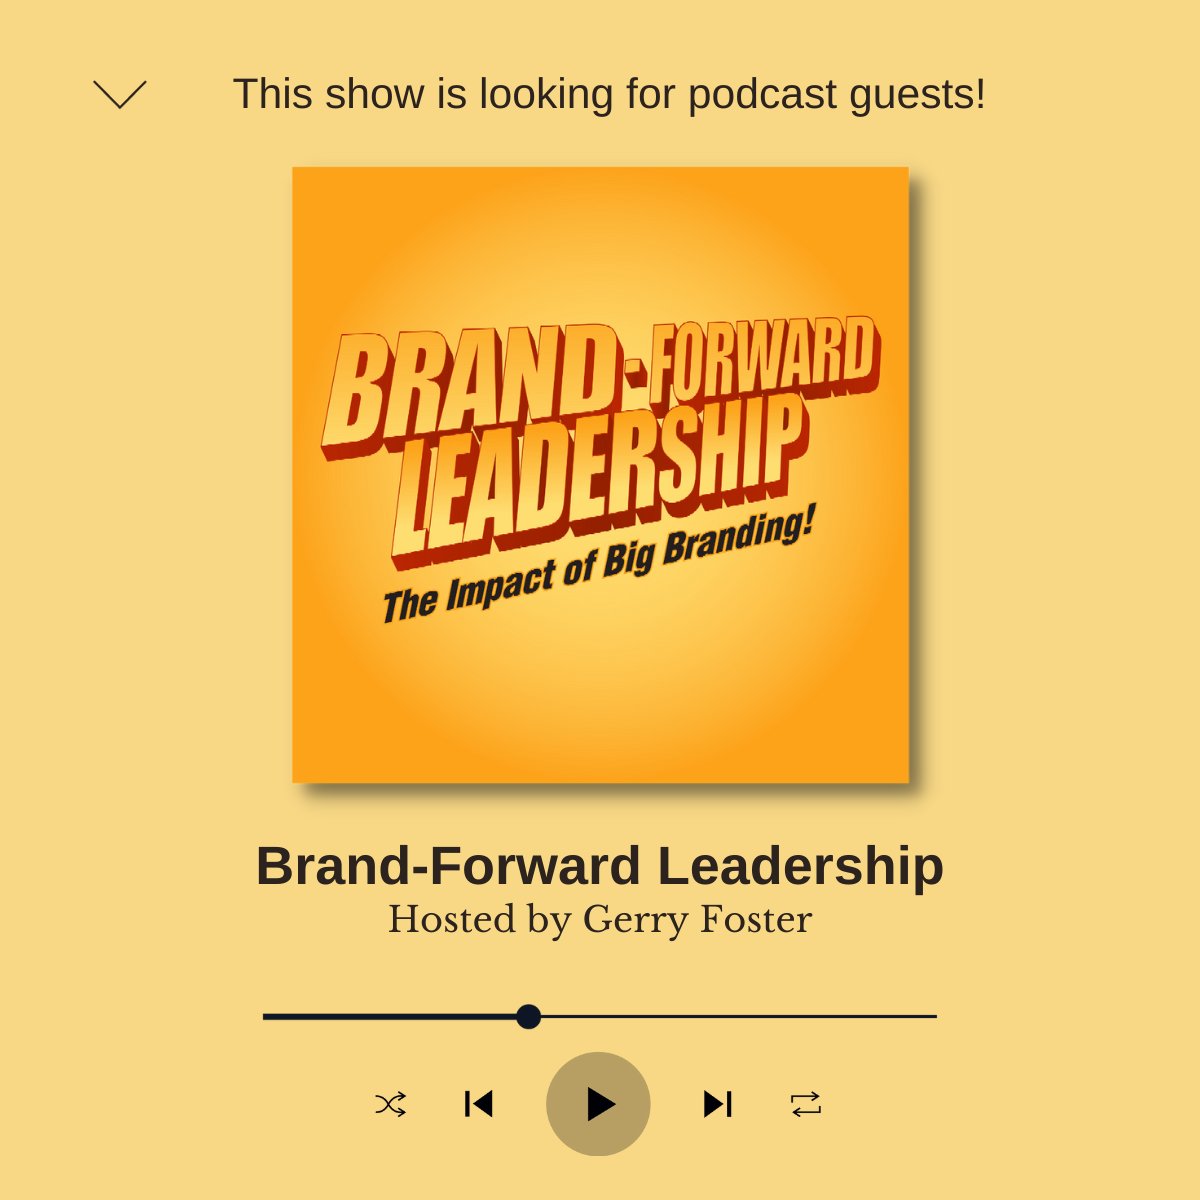 Calling all empowered leaders! If you run a B2B or B2C business, here's a chance to be featured on the Brand-Forward Leadership Podcast hosted by @GerryFoster. Apply here: go.gerryfosterbranding.com/podcast-guest #podcast #branding #entrepreneurship #findaguest #beaguest #journorequest